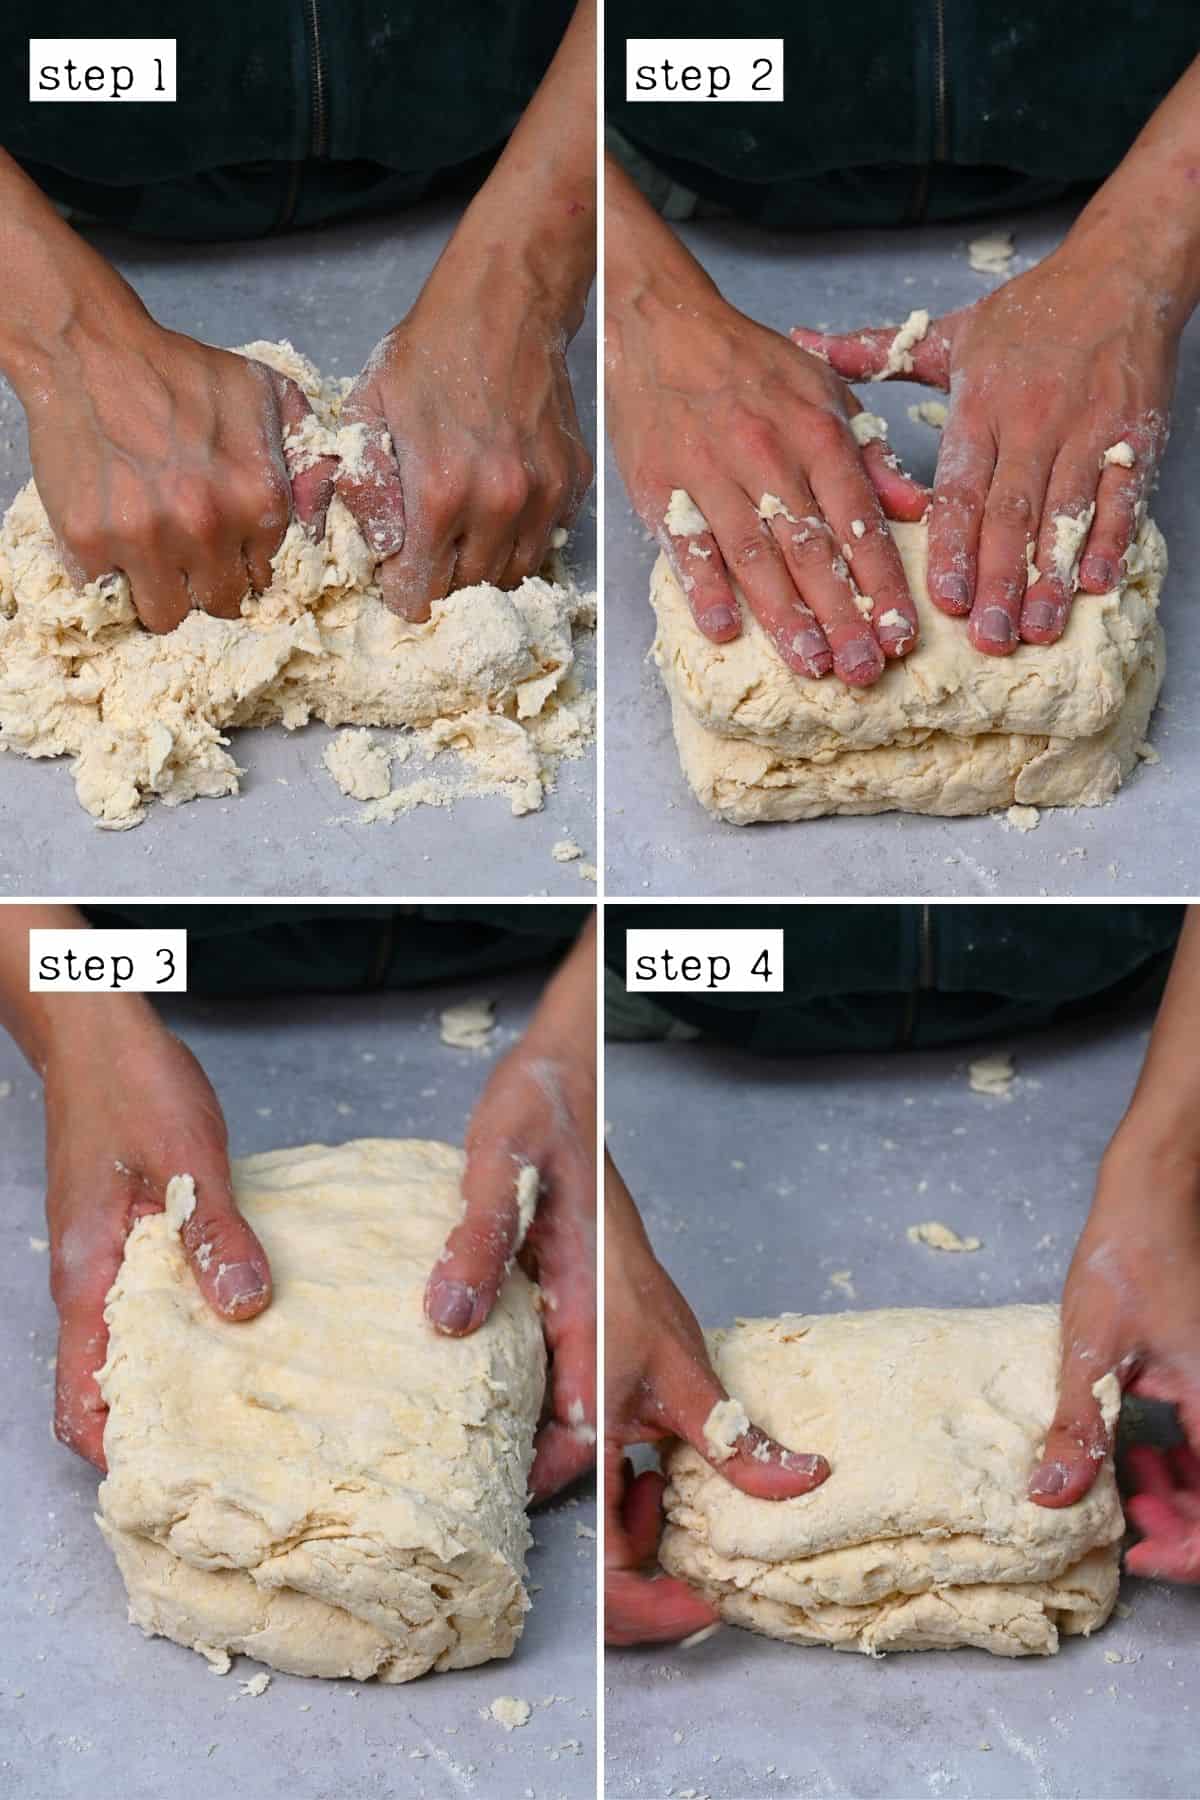 Steps for mixing biscuit dough